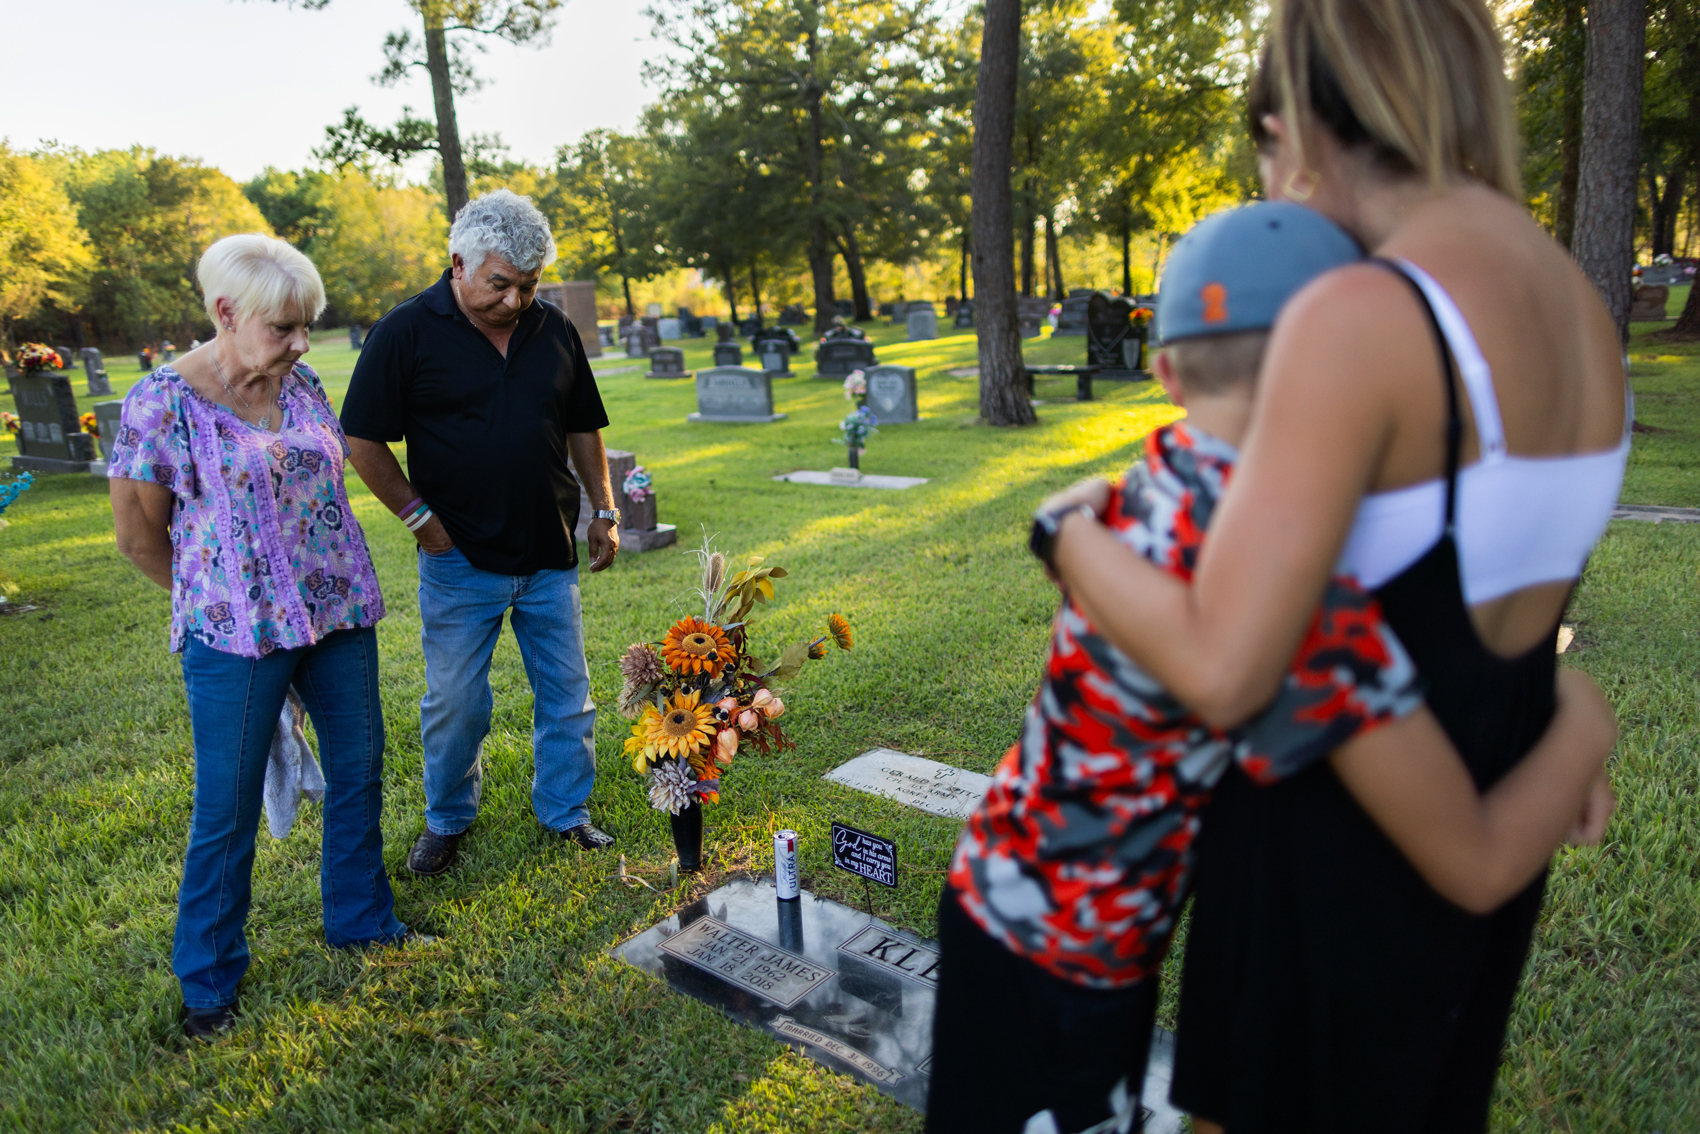 Debbie and Jaime Chapa (left) and Connor and Jaime Newton stand by Walt Klein's grave site in September. Walt's family has been visiting his grave every month since 2018, when he died following a heart attack in the Harris County Jail.